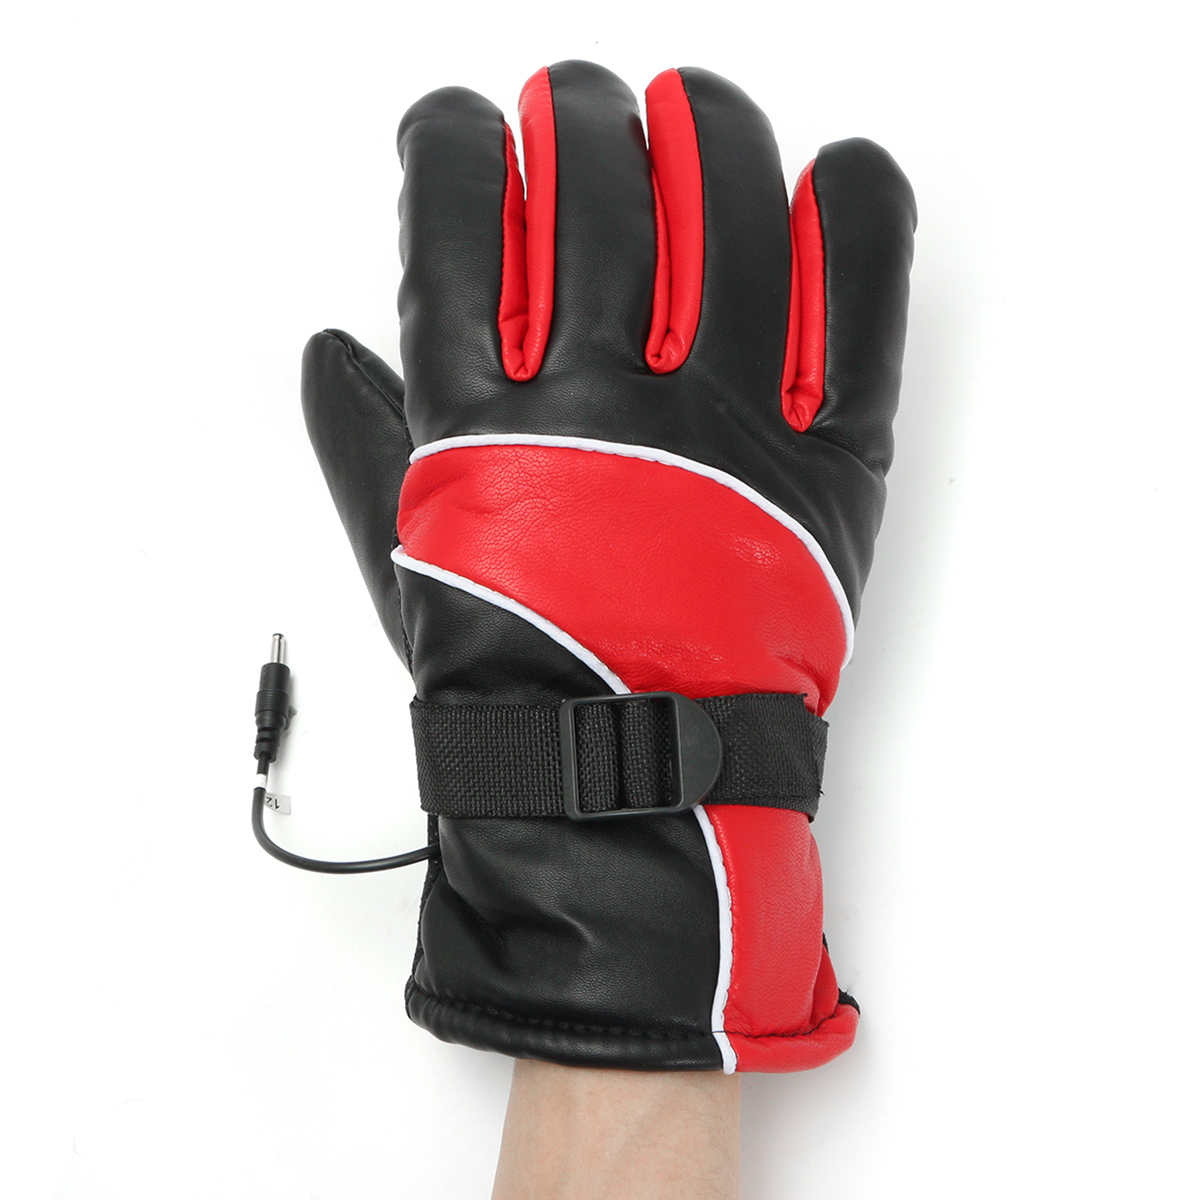 12V-Warm-Electric-Heated-Warmer-Winter-Gloves-Motorcycle-Scooter-E-bike-1222777